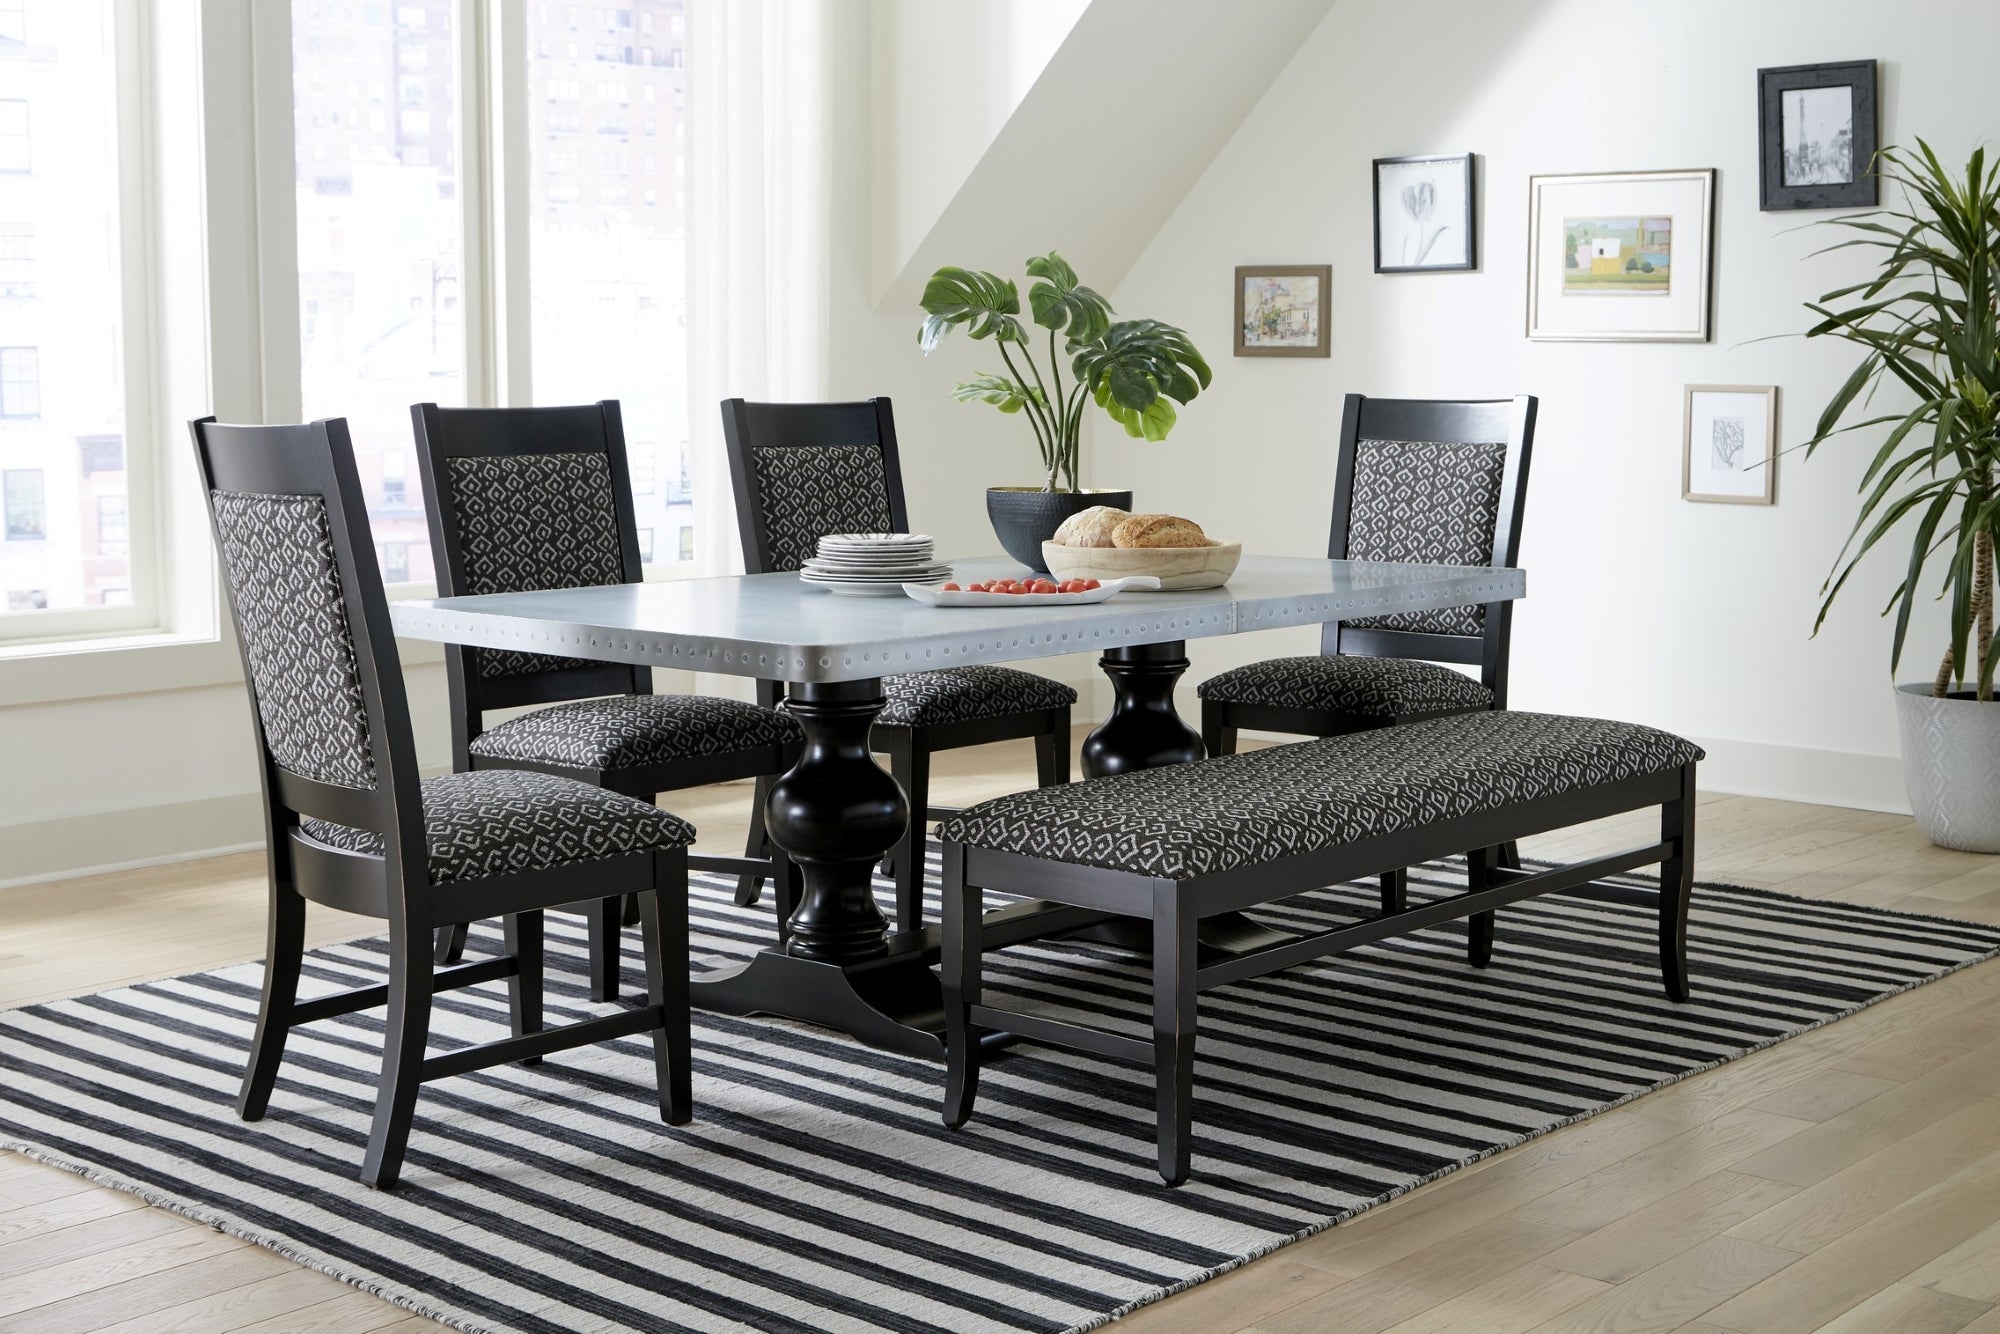 Dining table with zinc top surrounded by black dining chairs and matching bench